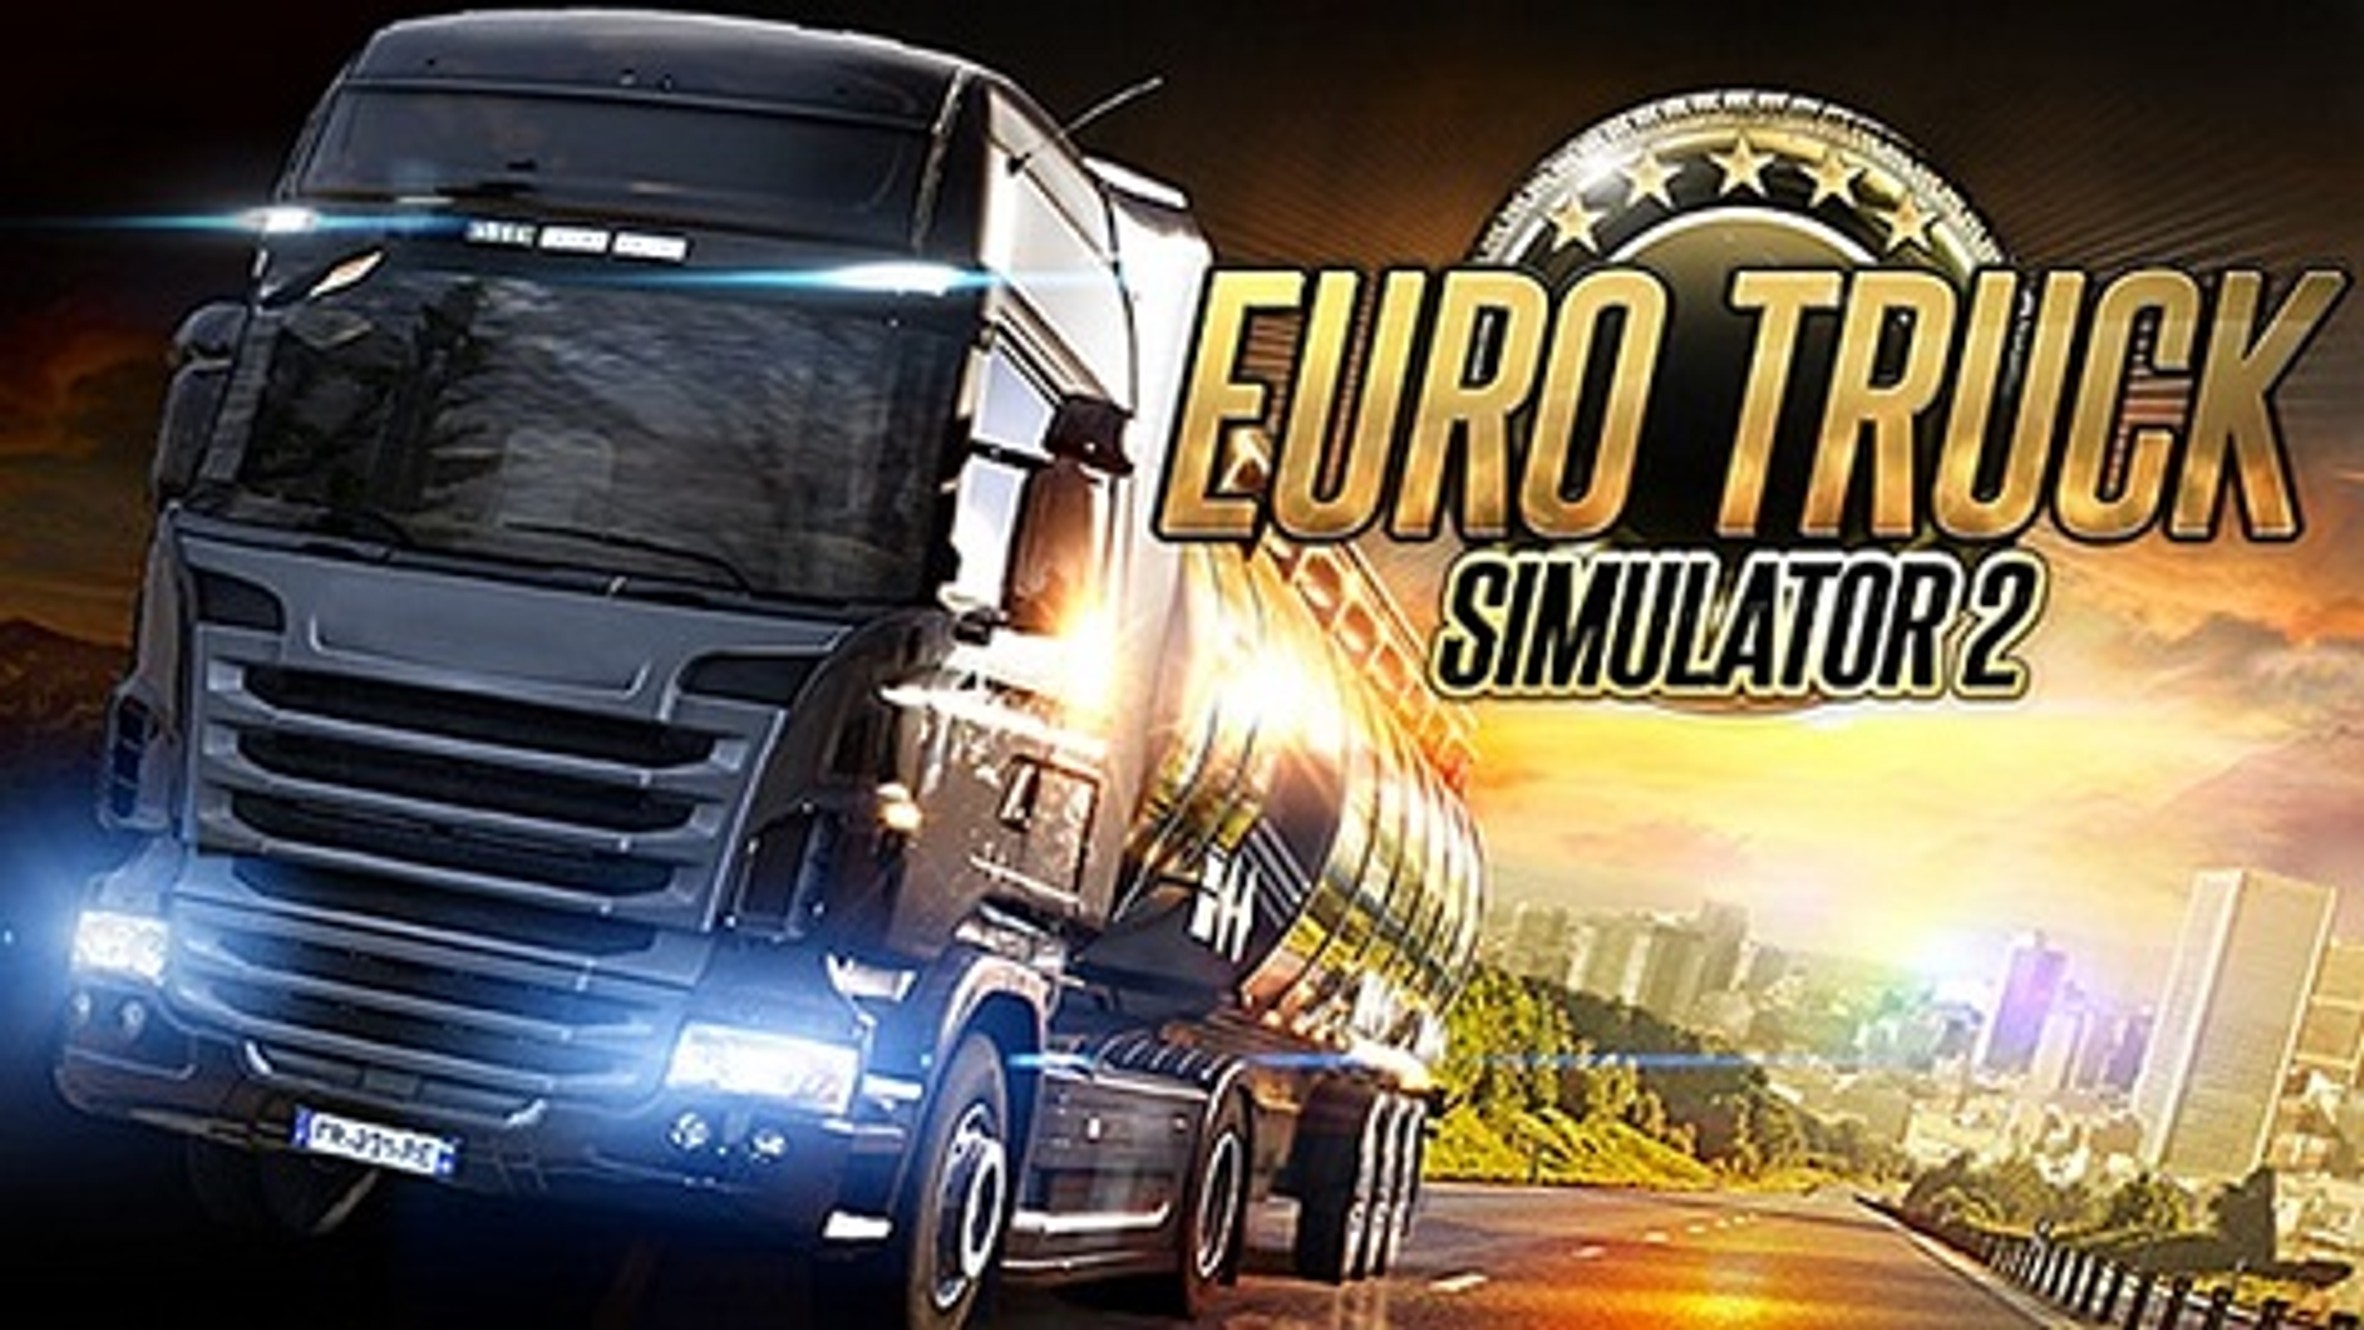 american truck simulator free download with all dlc